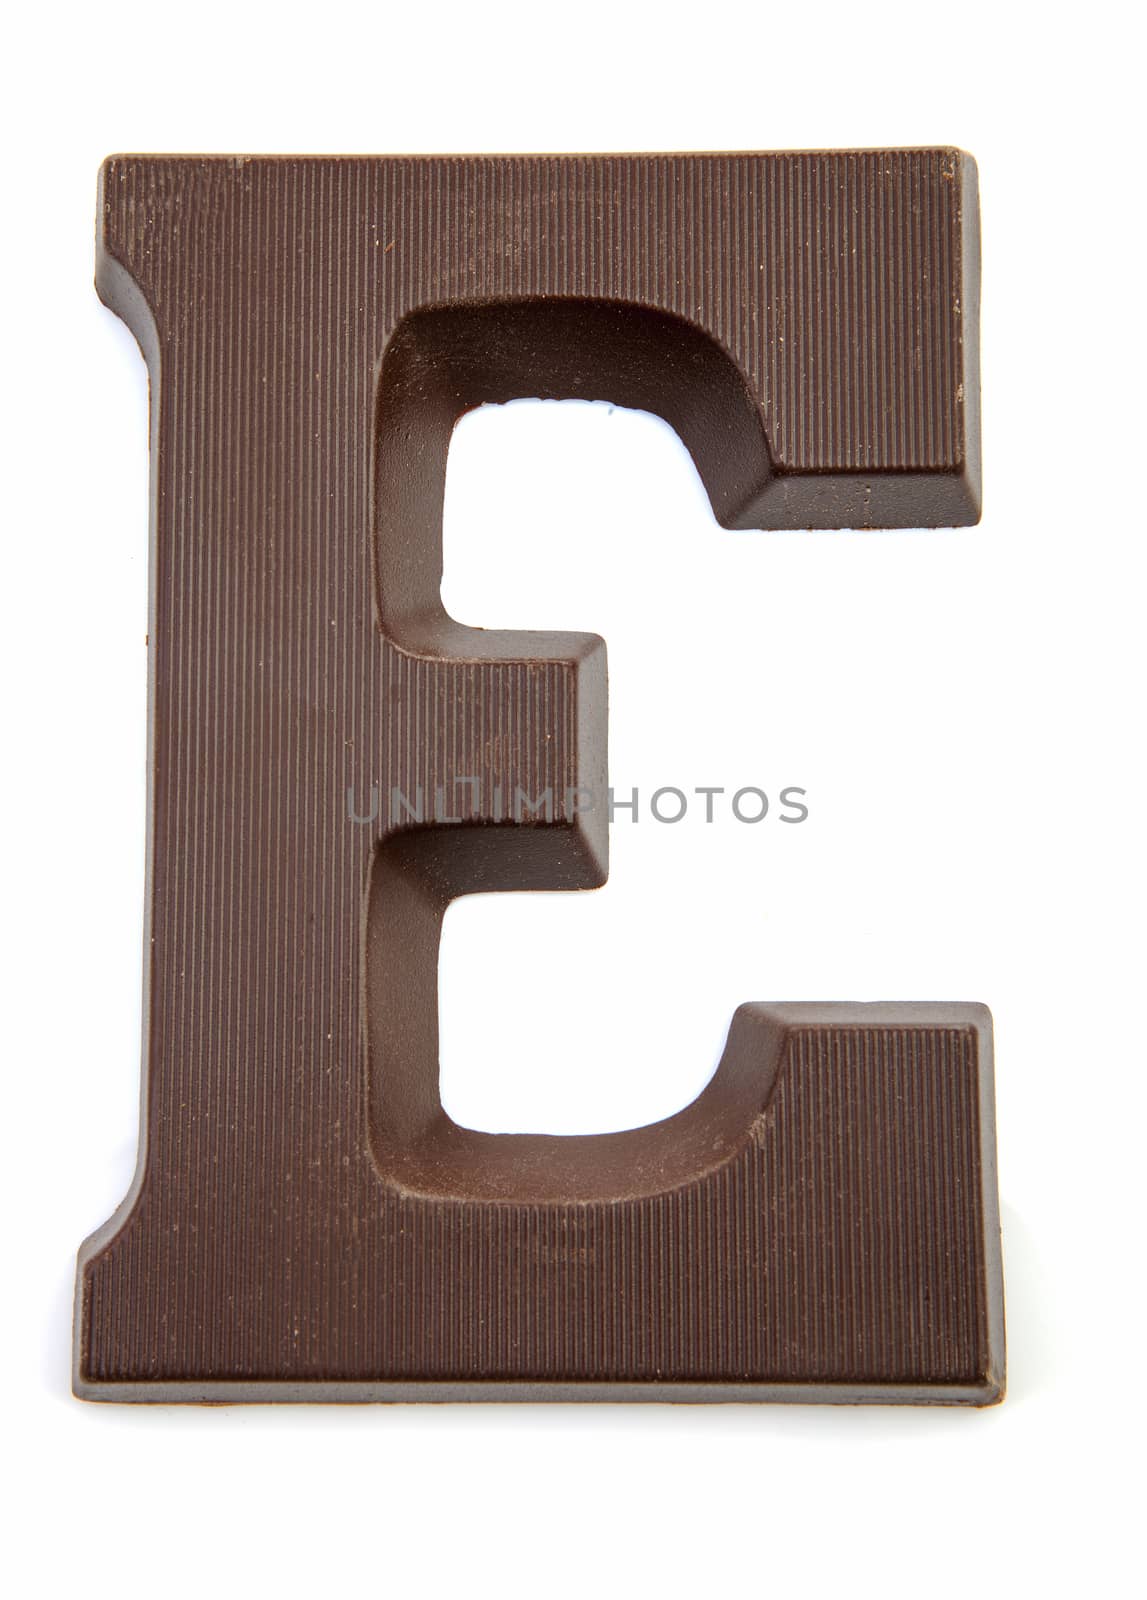 Chocolate letter E for Sinterklaas, event in the Dutch in december over white background